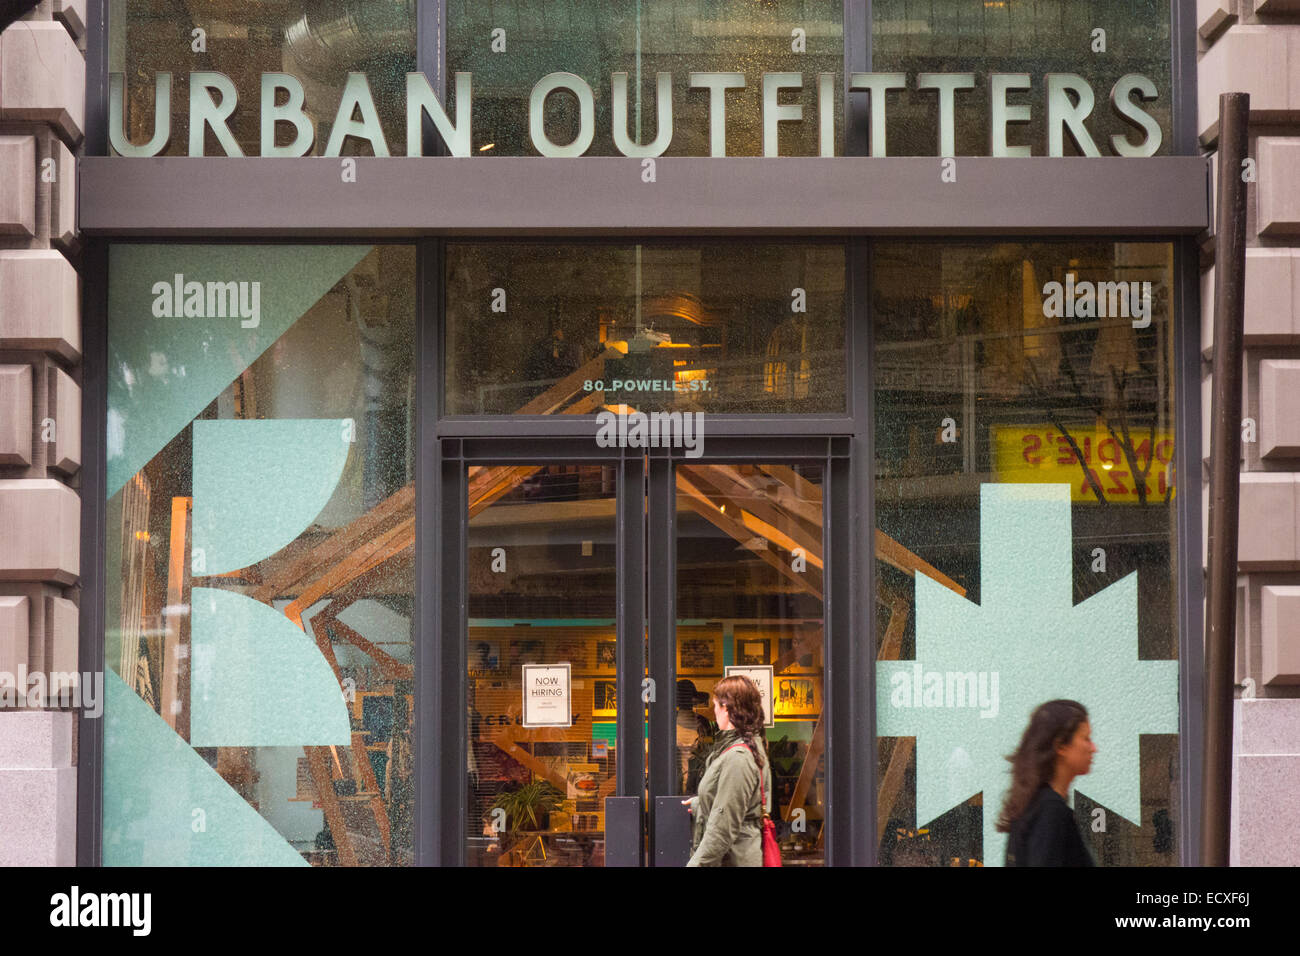 Urban Outfitters Sign High Resolution Stock Photography and Images - Alamy